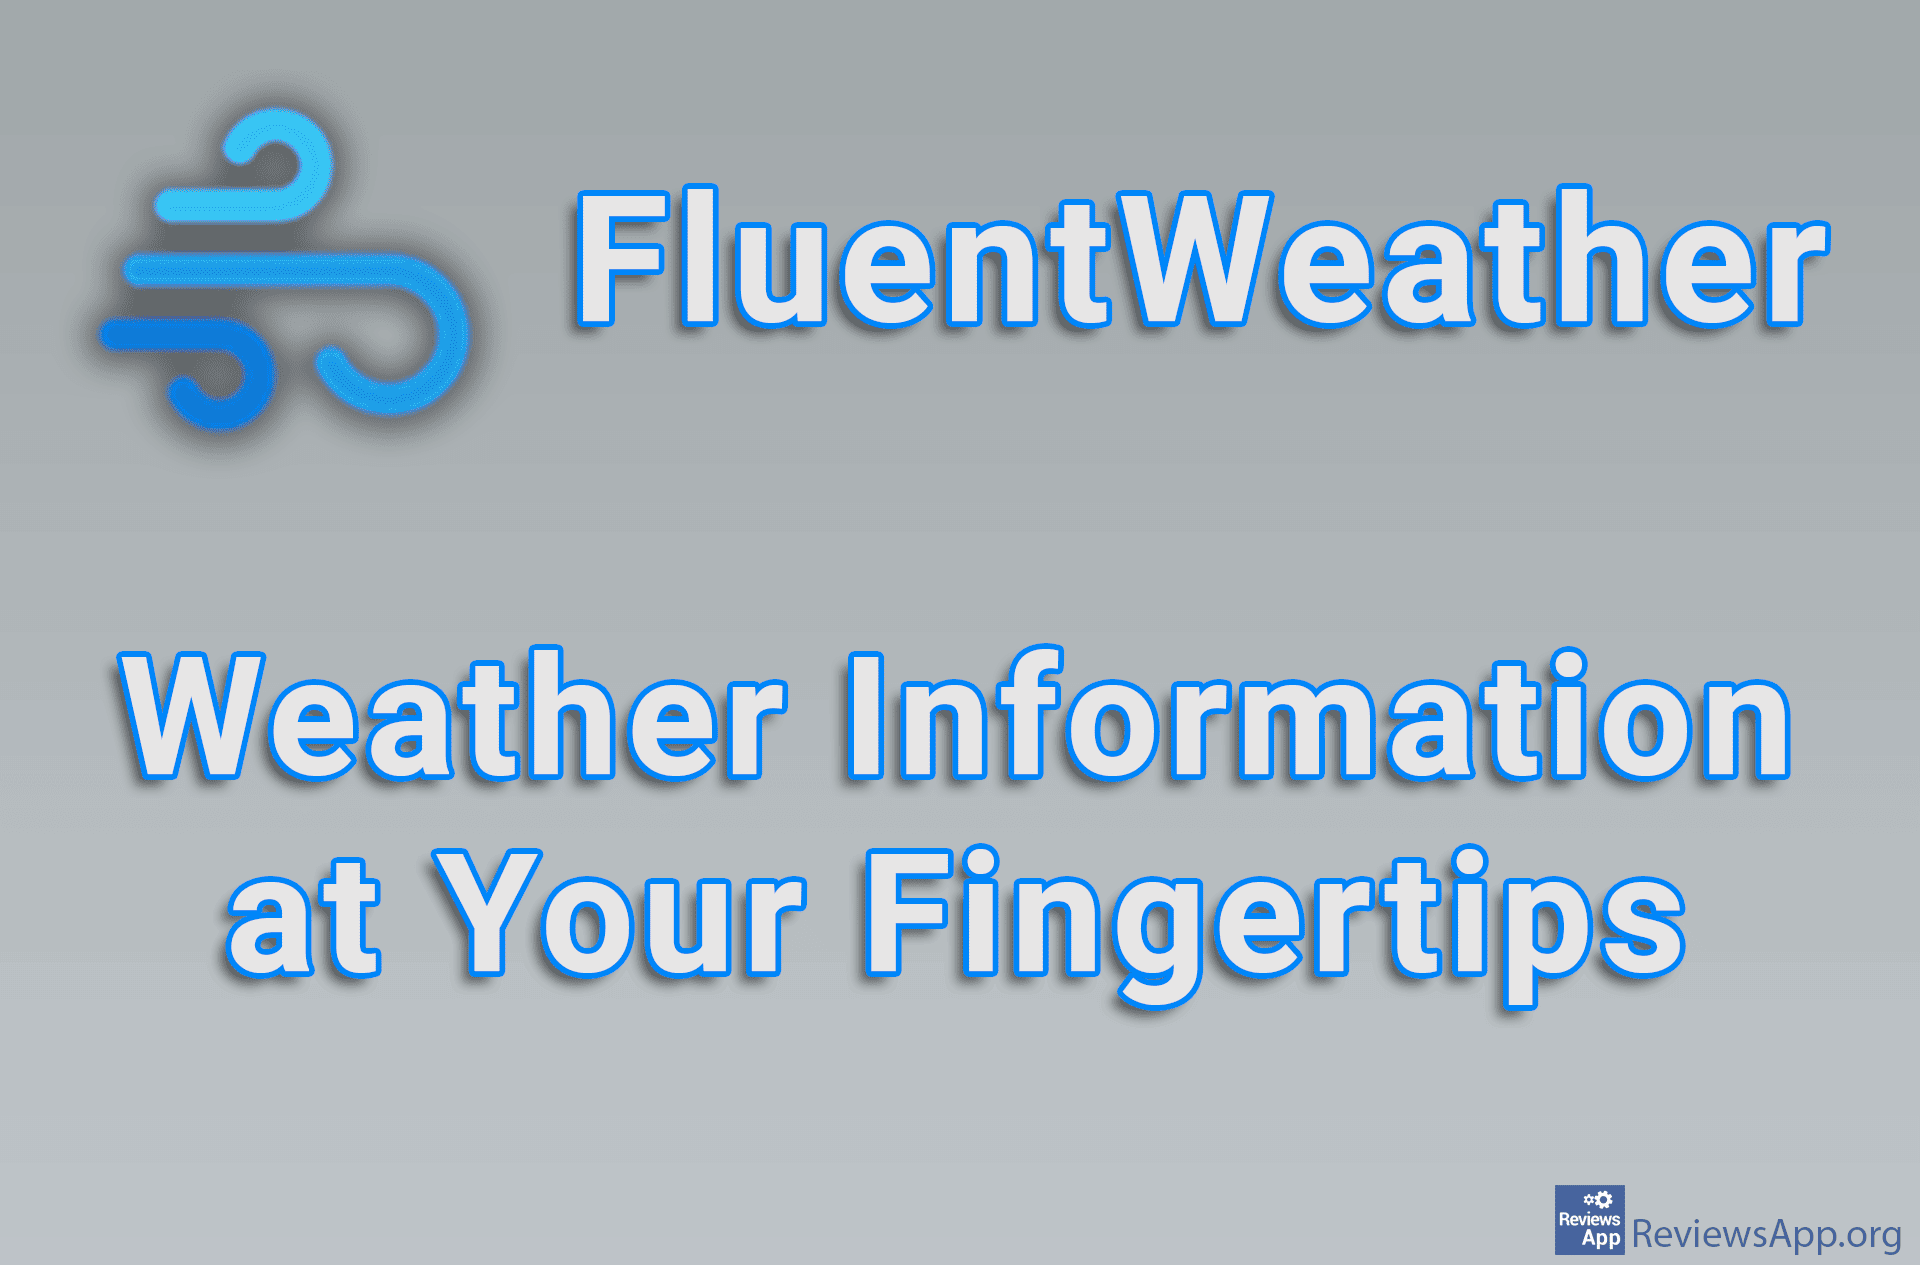 FluentWeather – Weather Information at Your Fingertips